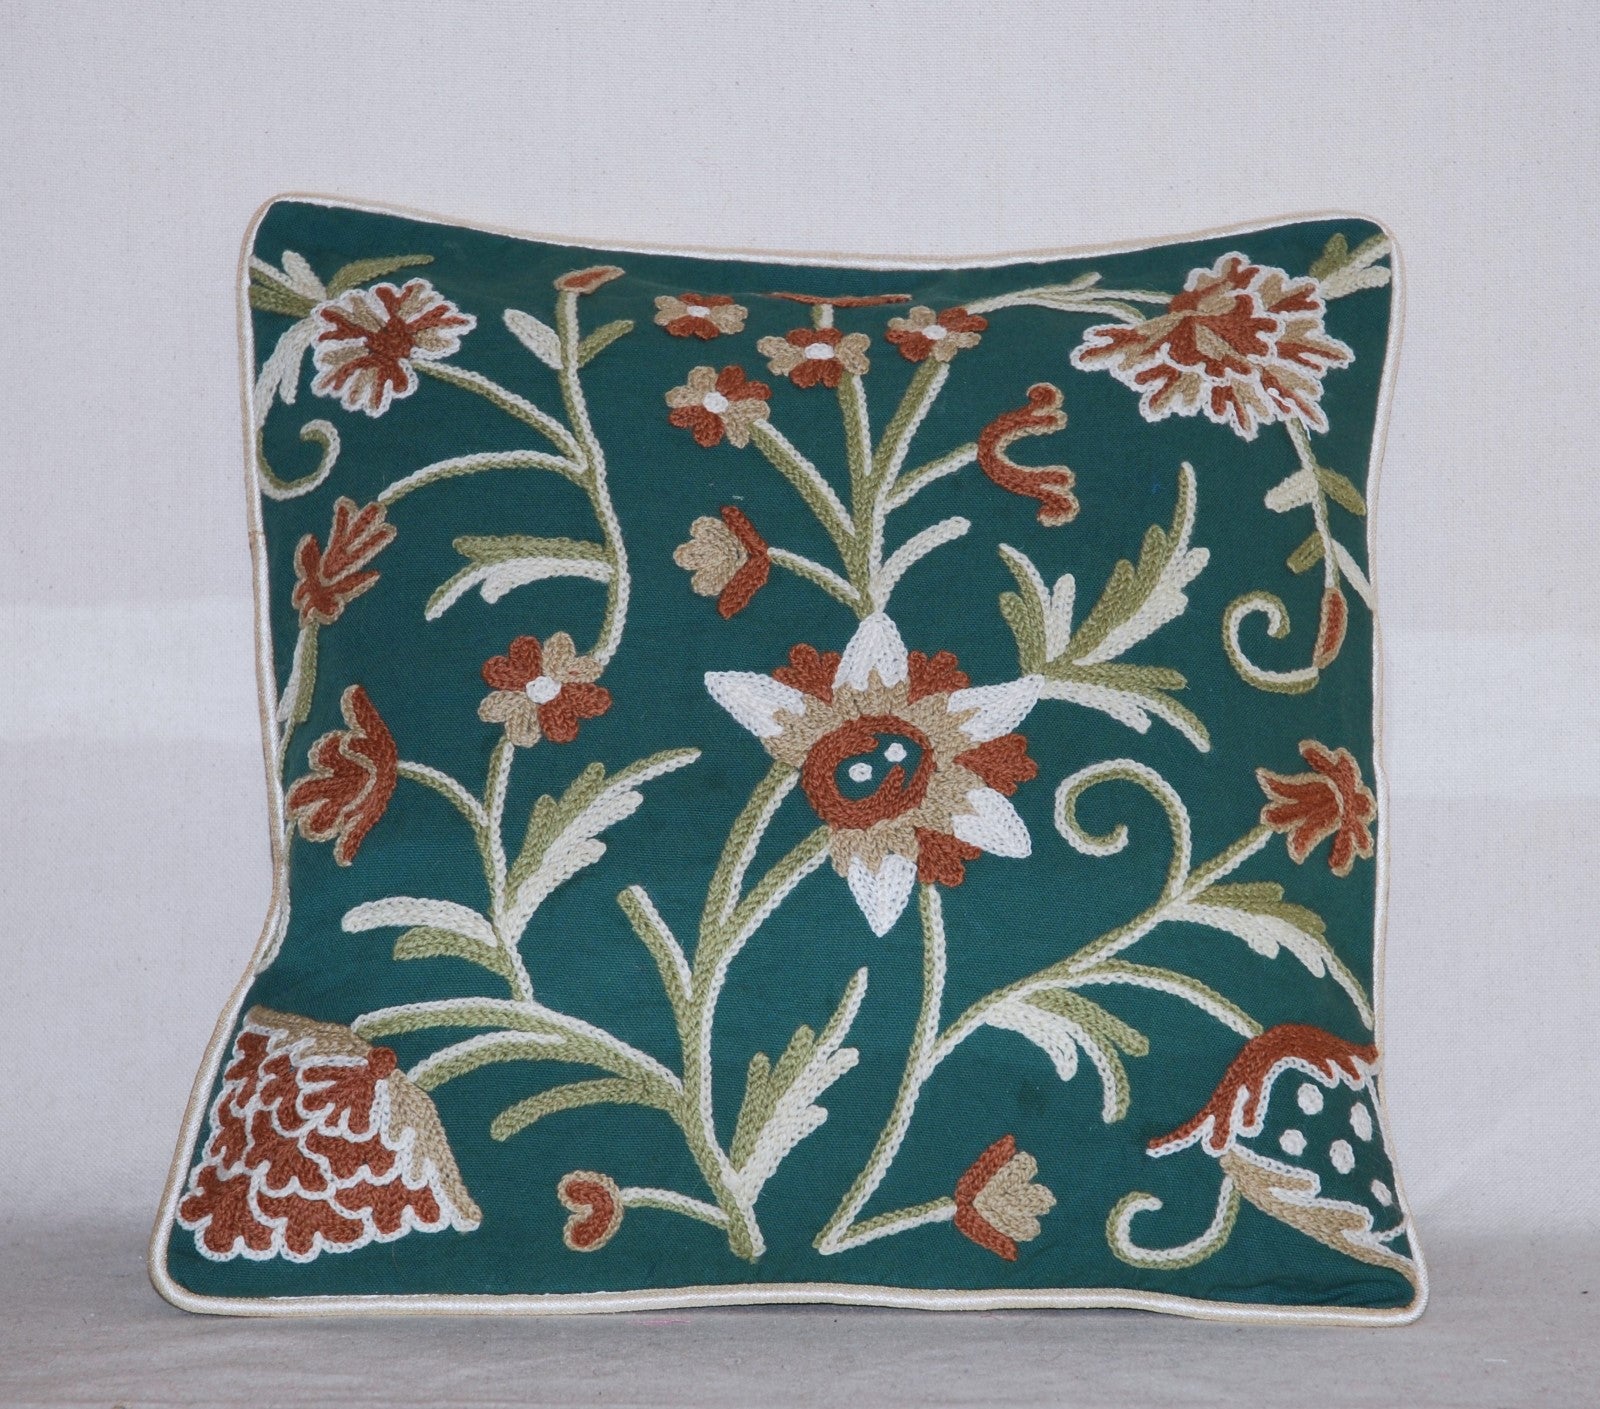 Crewel Embroidery Throw Pillowcase, Cushion Cover Multicolor on Green #CW436